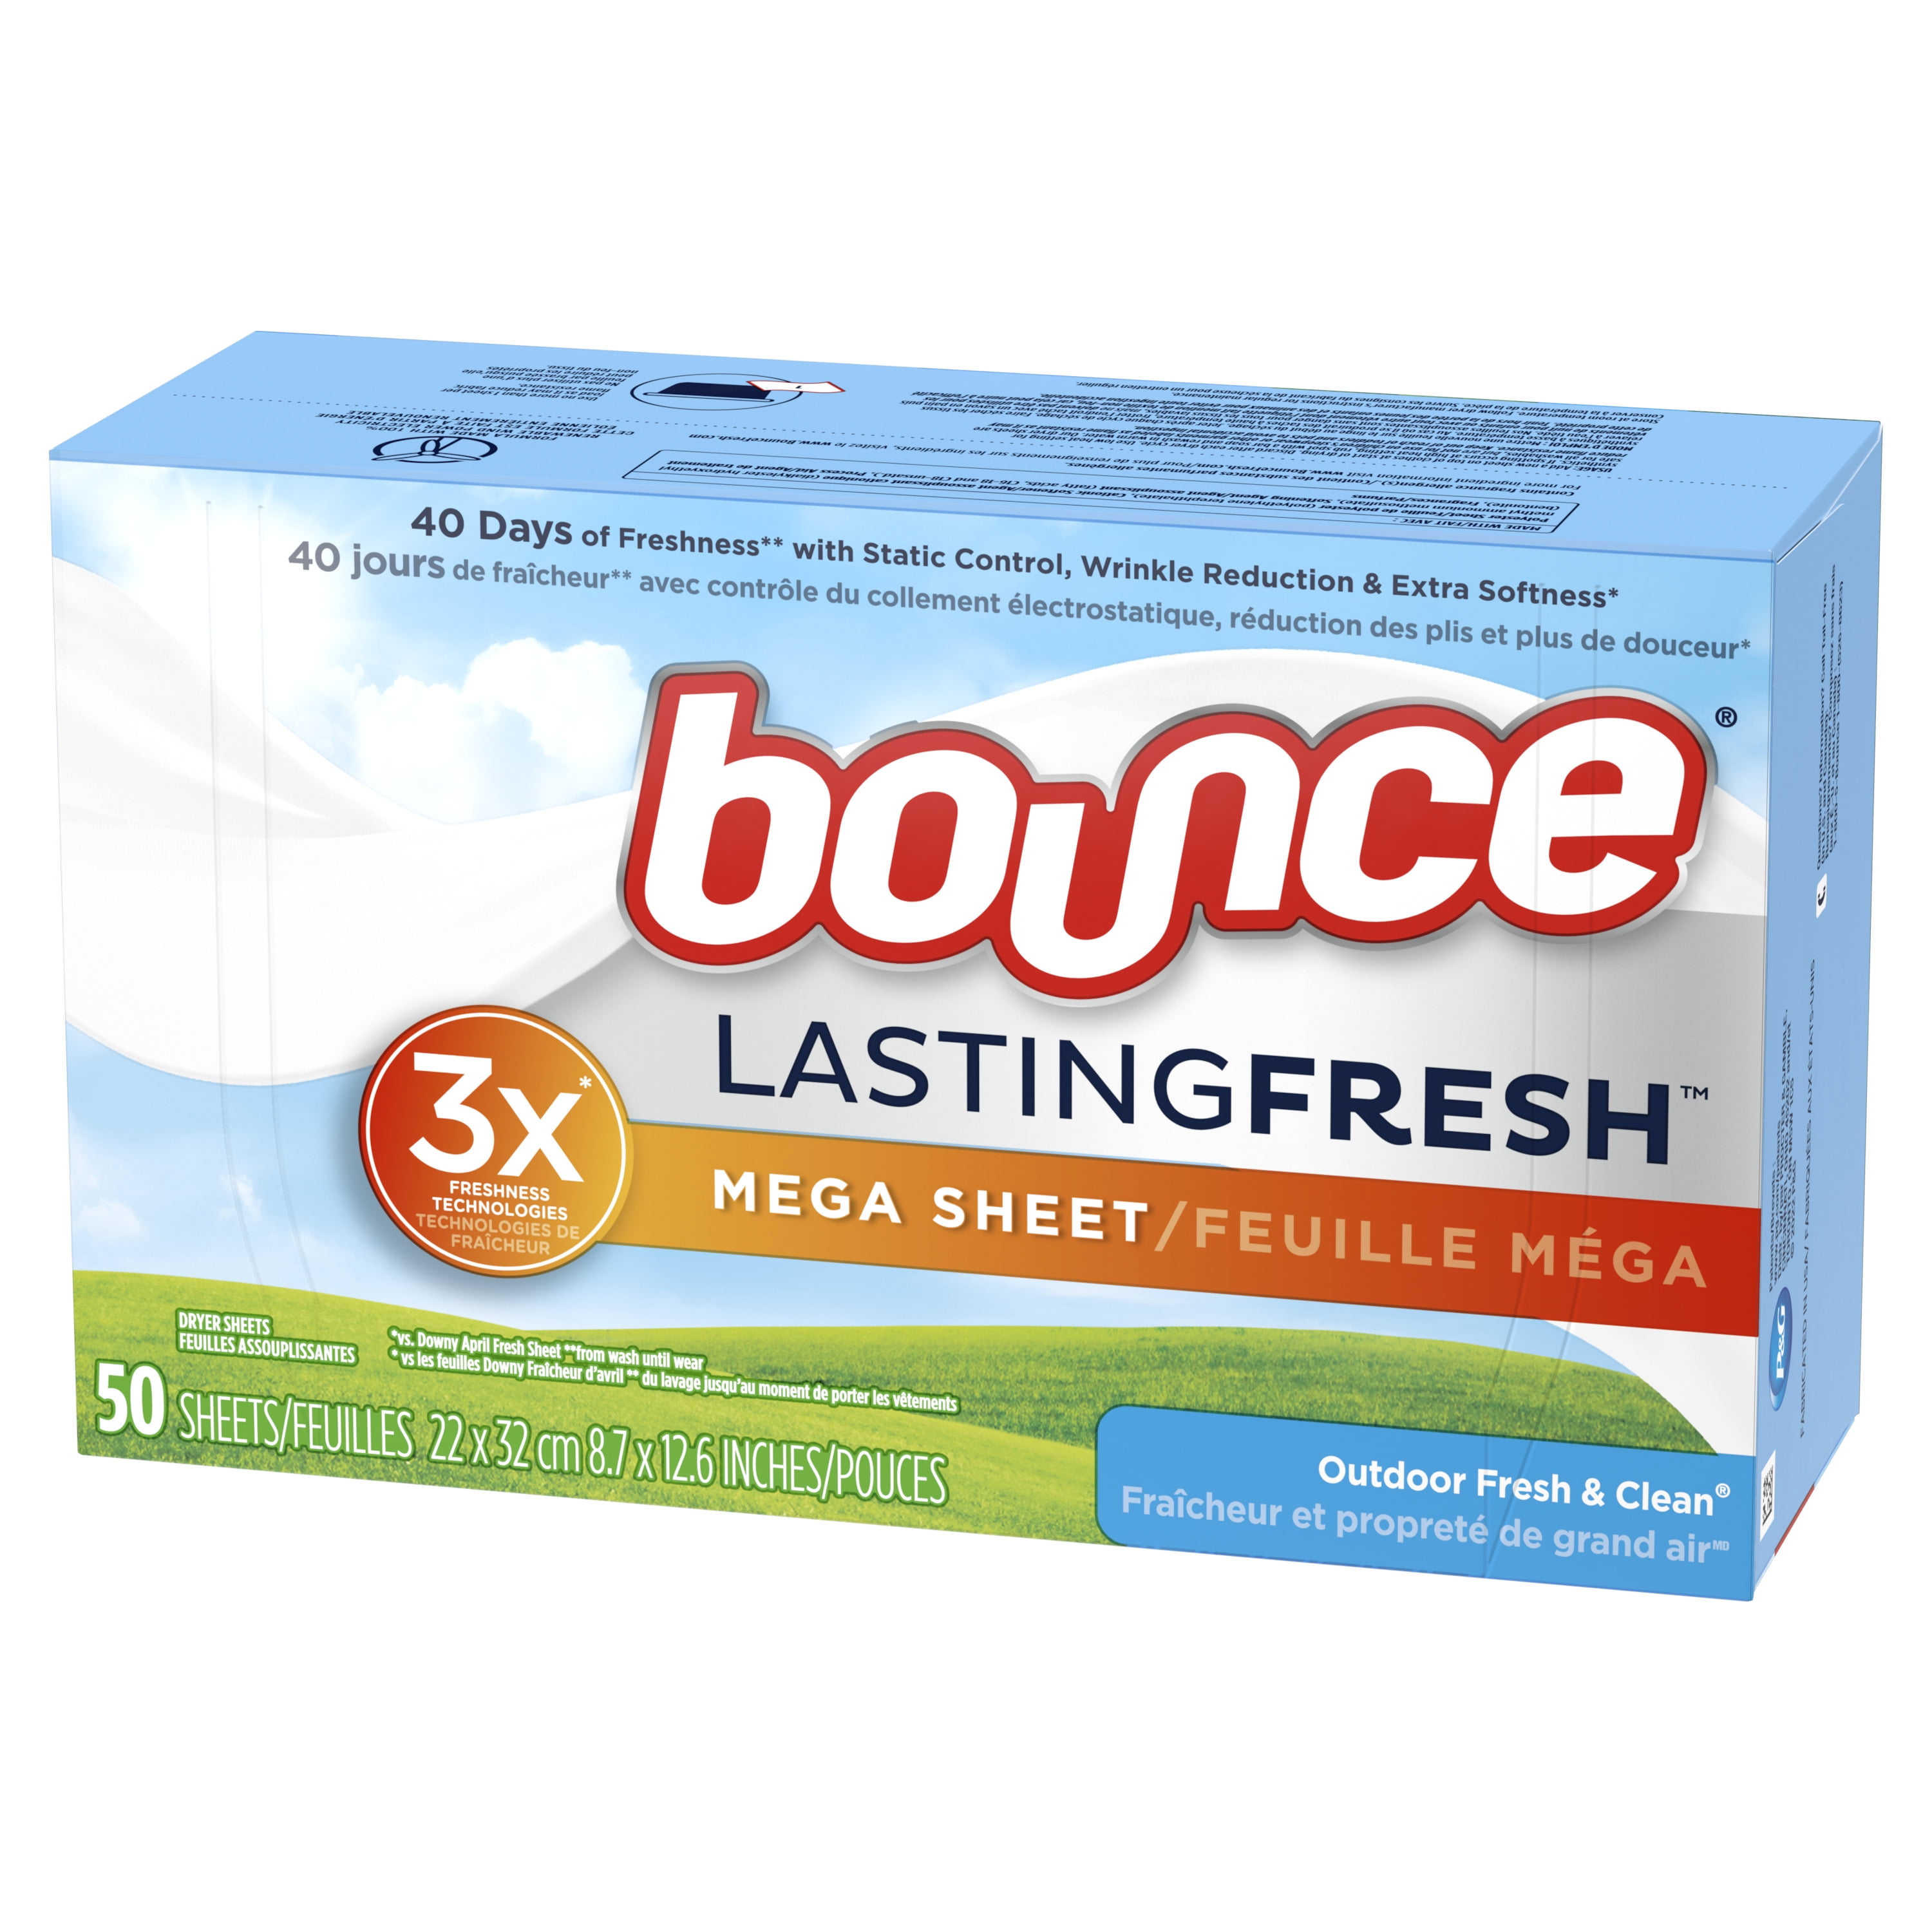 Bounce Free & Gentle Dryer Sheets, 180 ct, Unscented